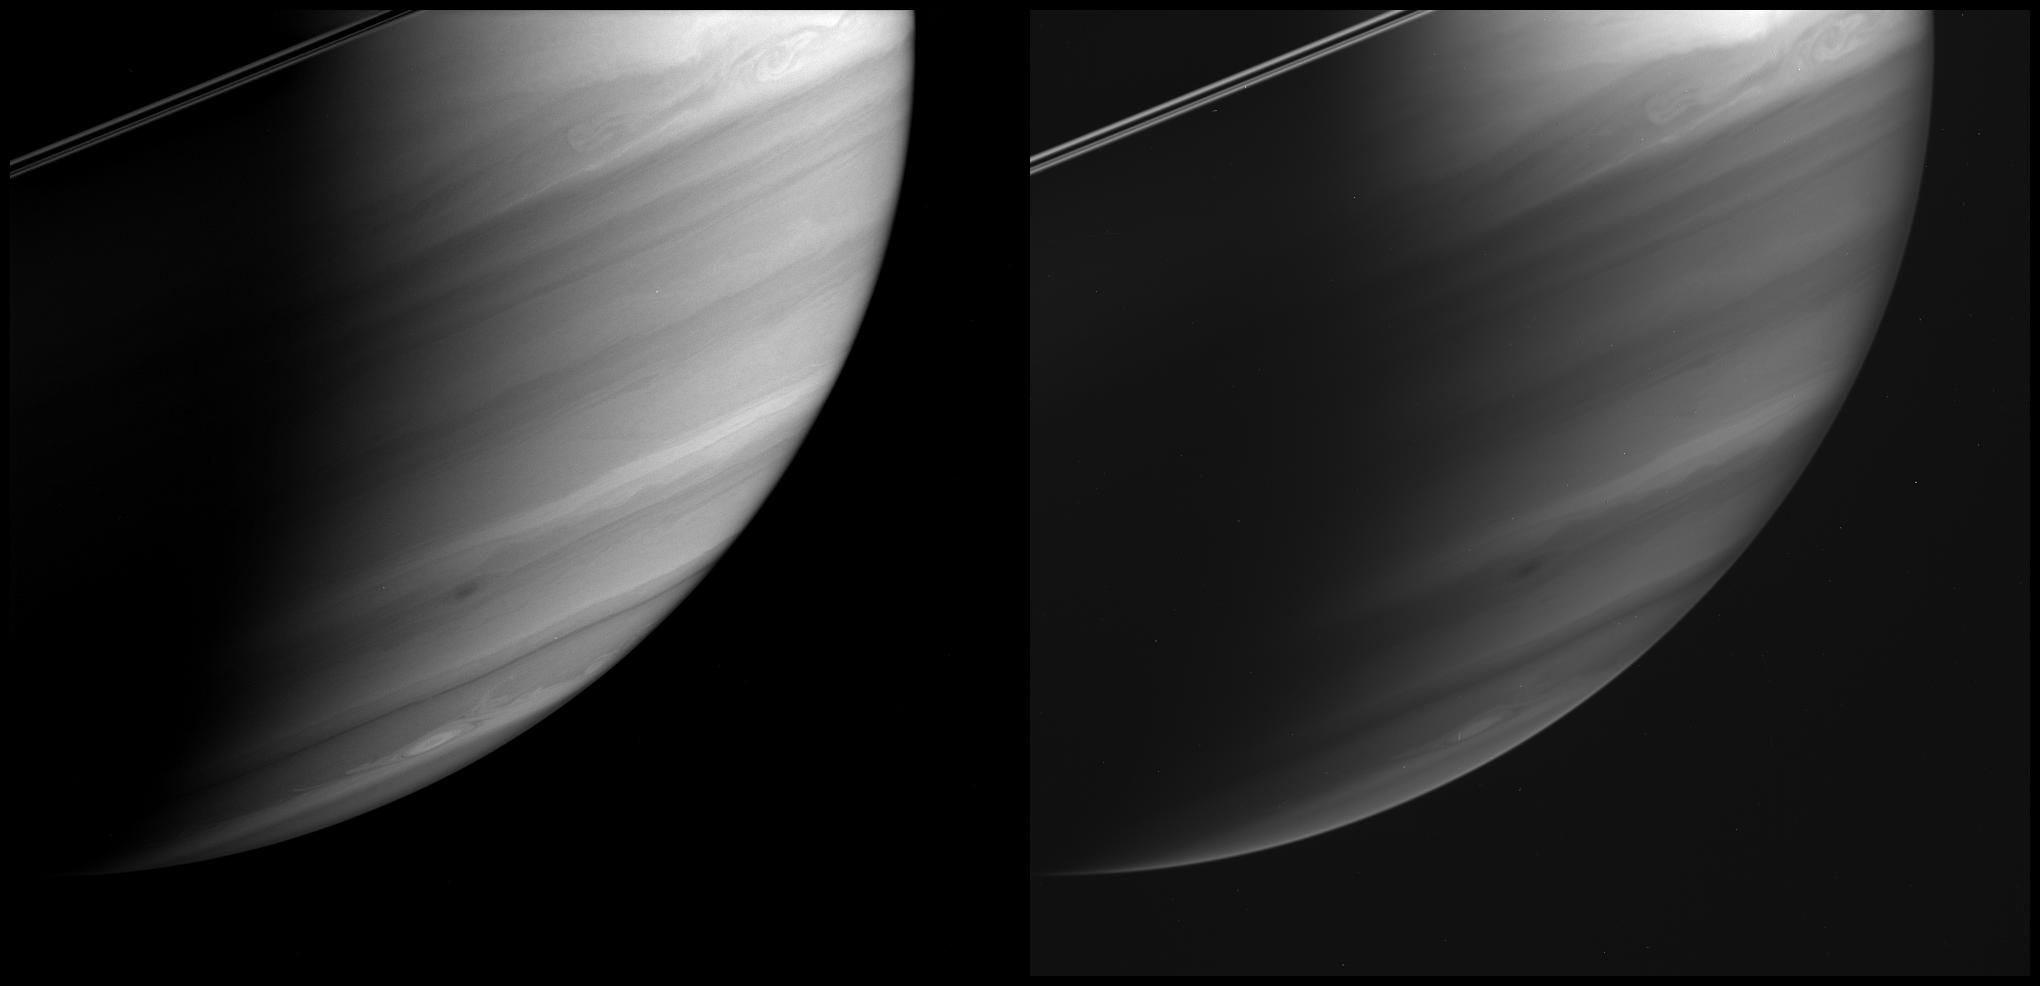 Two views of Saturn